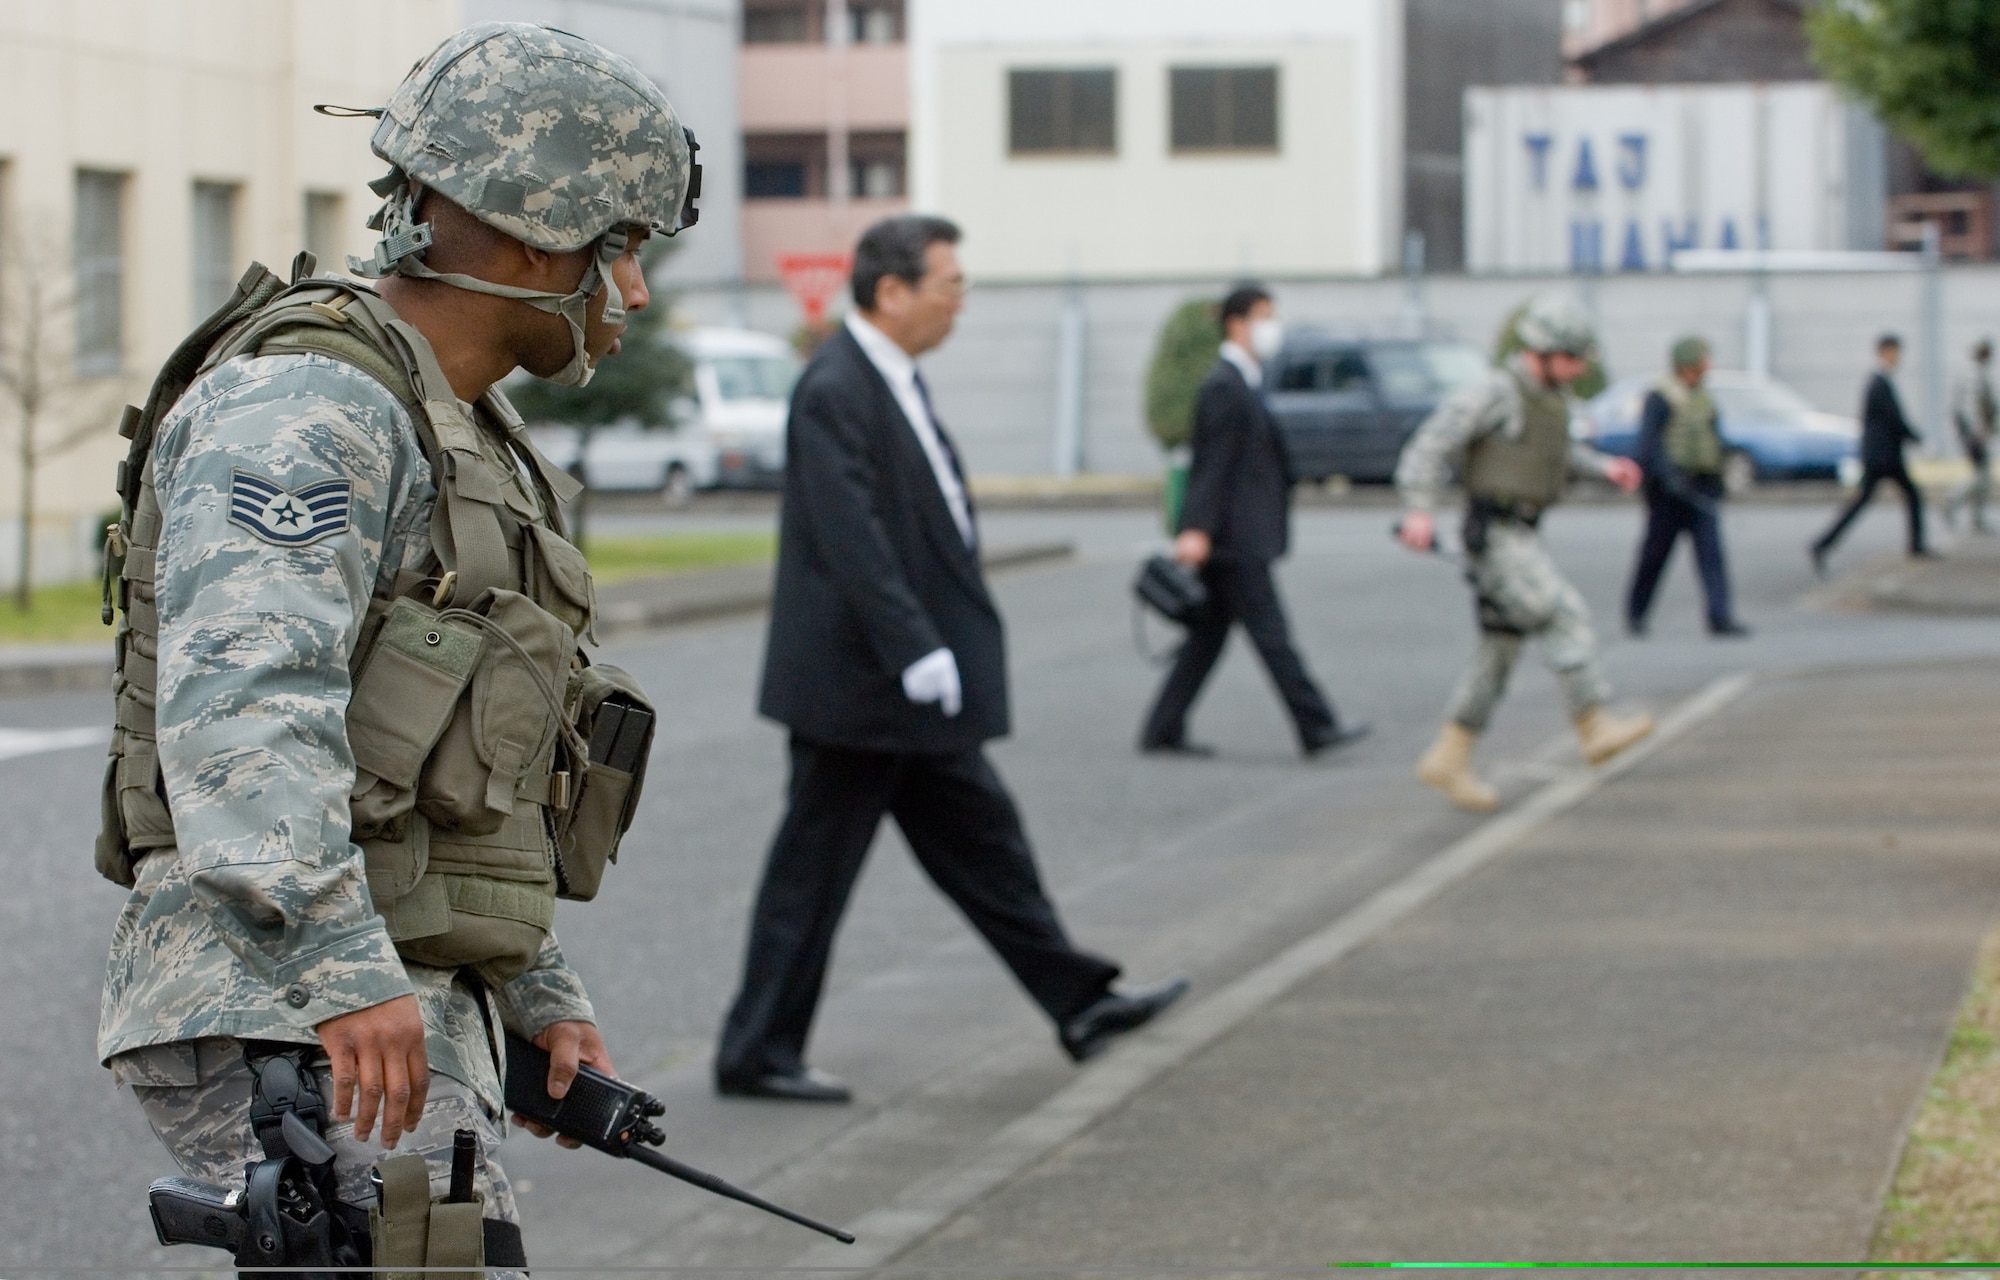 Staff Sgt. Jay King searches for unexploded ordnance with the Japanese National Police-Fussa Division during a joint unexploded ordnance response exercise March 27 at Yokota Air Base, Japan. Sergeant King is assigned to the 374th Security Force Squadron. (U.S. Air Force photo/Osakabe Yasuo) 
